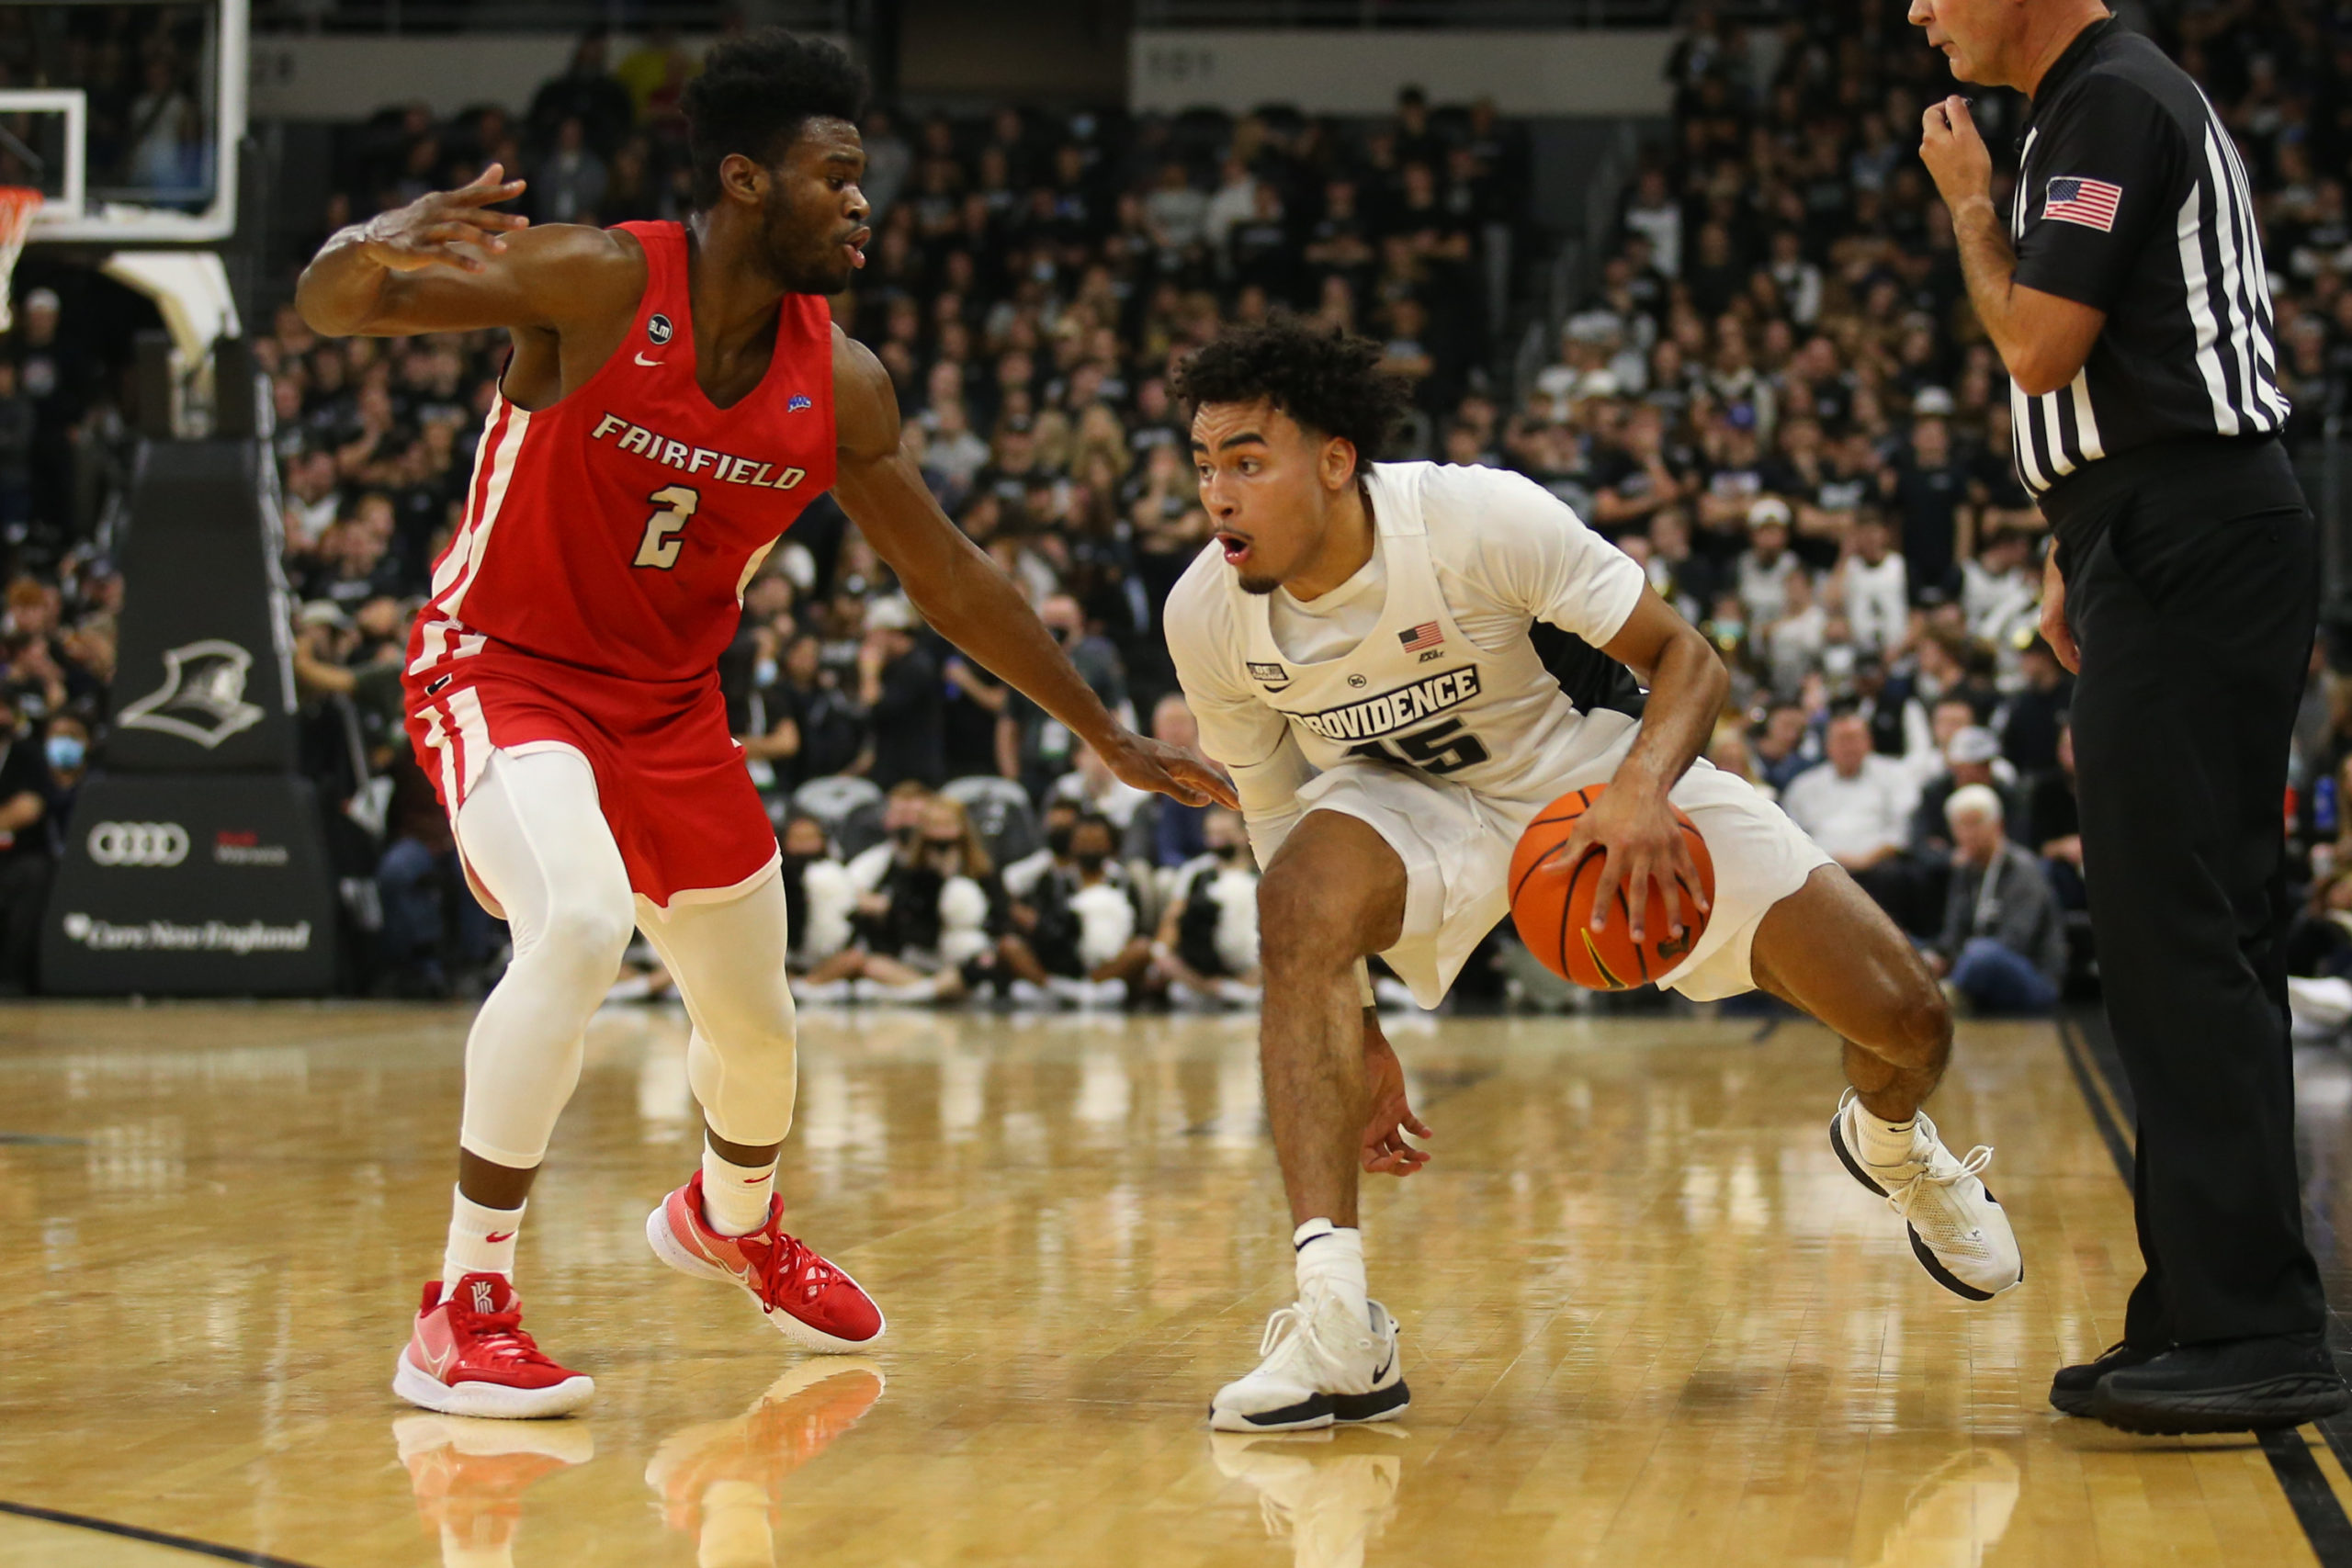 Turn The Page: Friars entering Big East but where will all the wins come from?